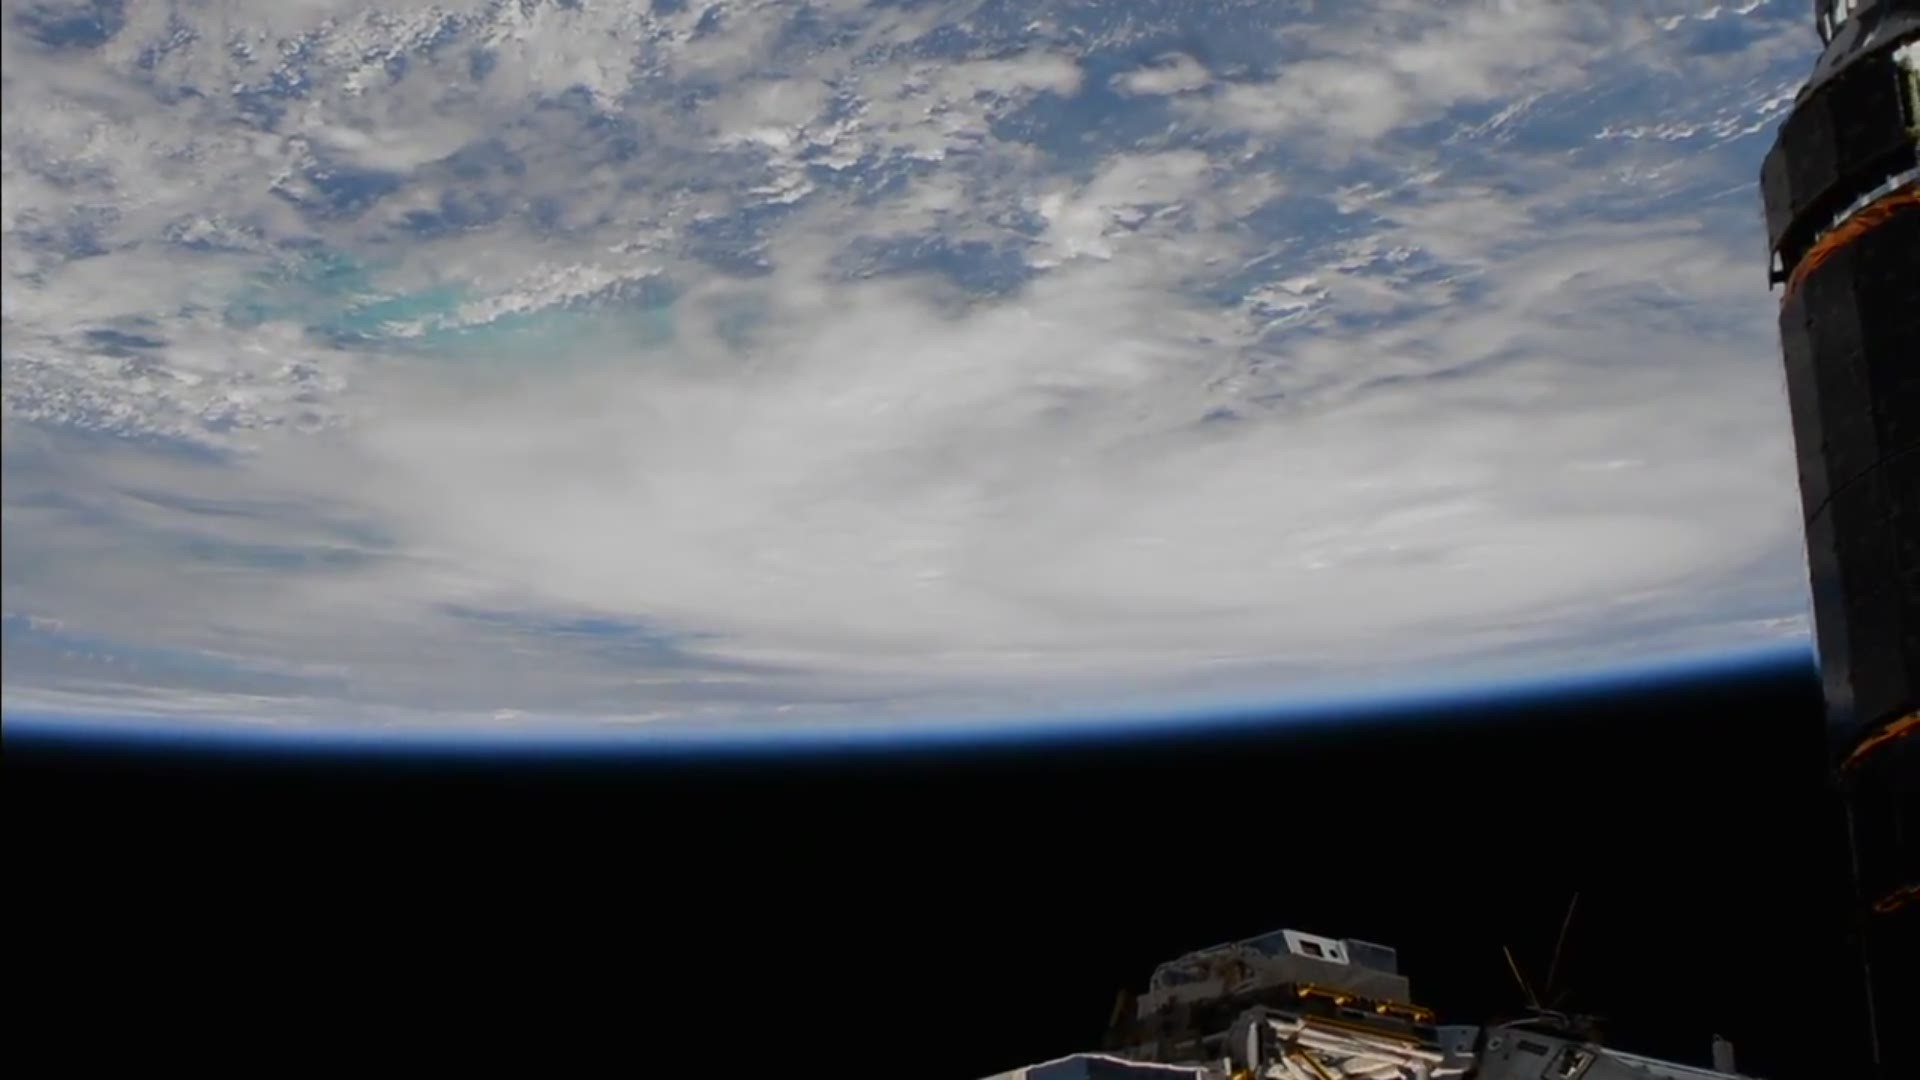 Cameras outside the International Space Station captured views of Hurricane Michael as the storm churned over the Gulf of Mexico. (NASA)